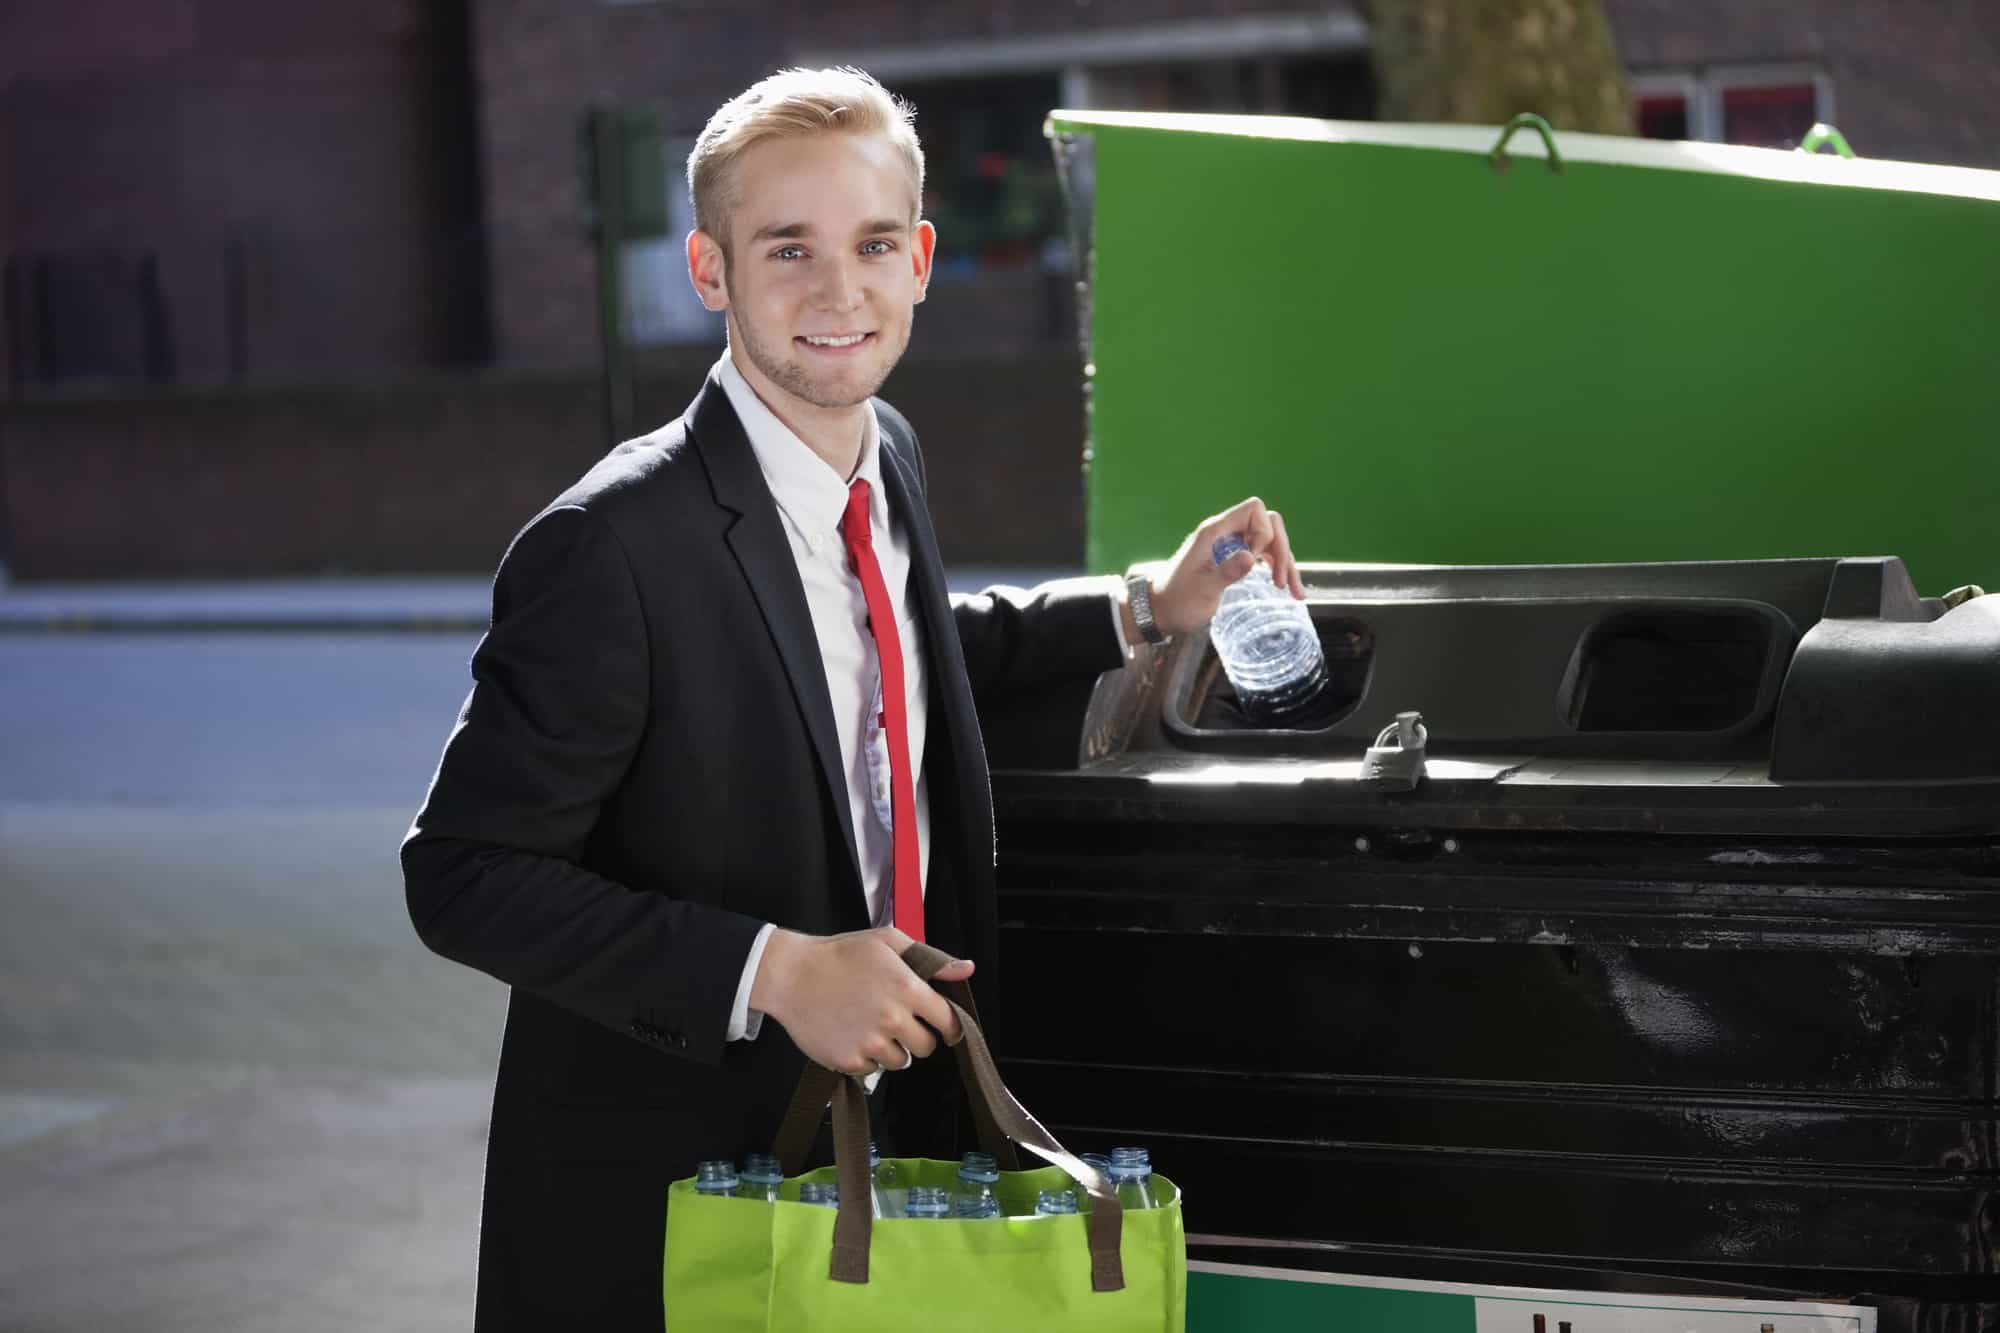 The Top 5 Shopping Centres For Recycling